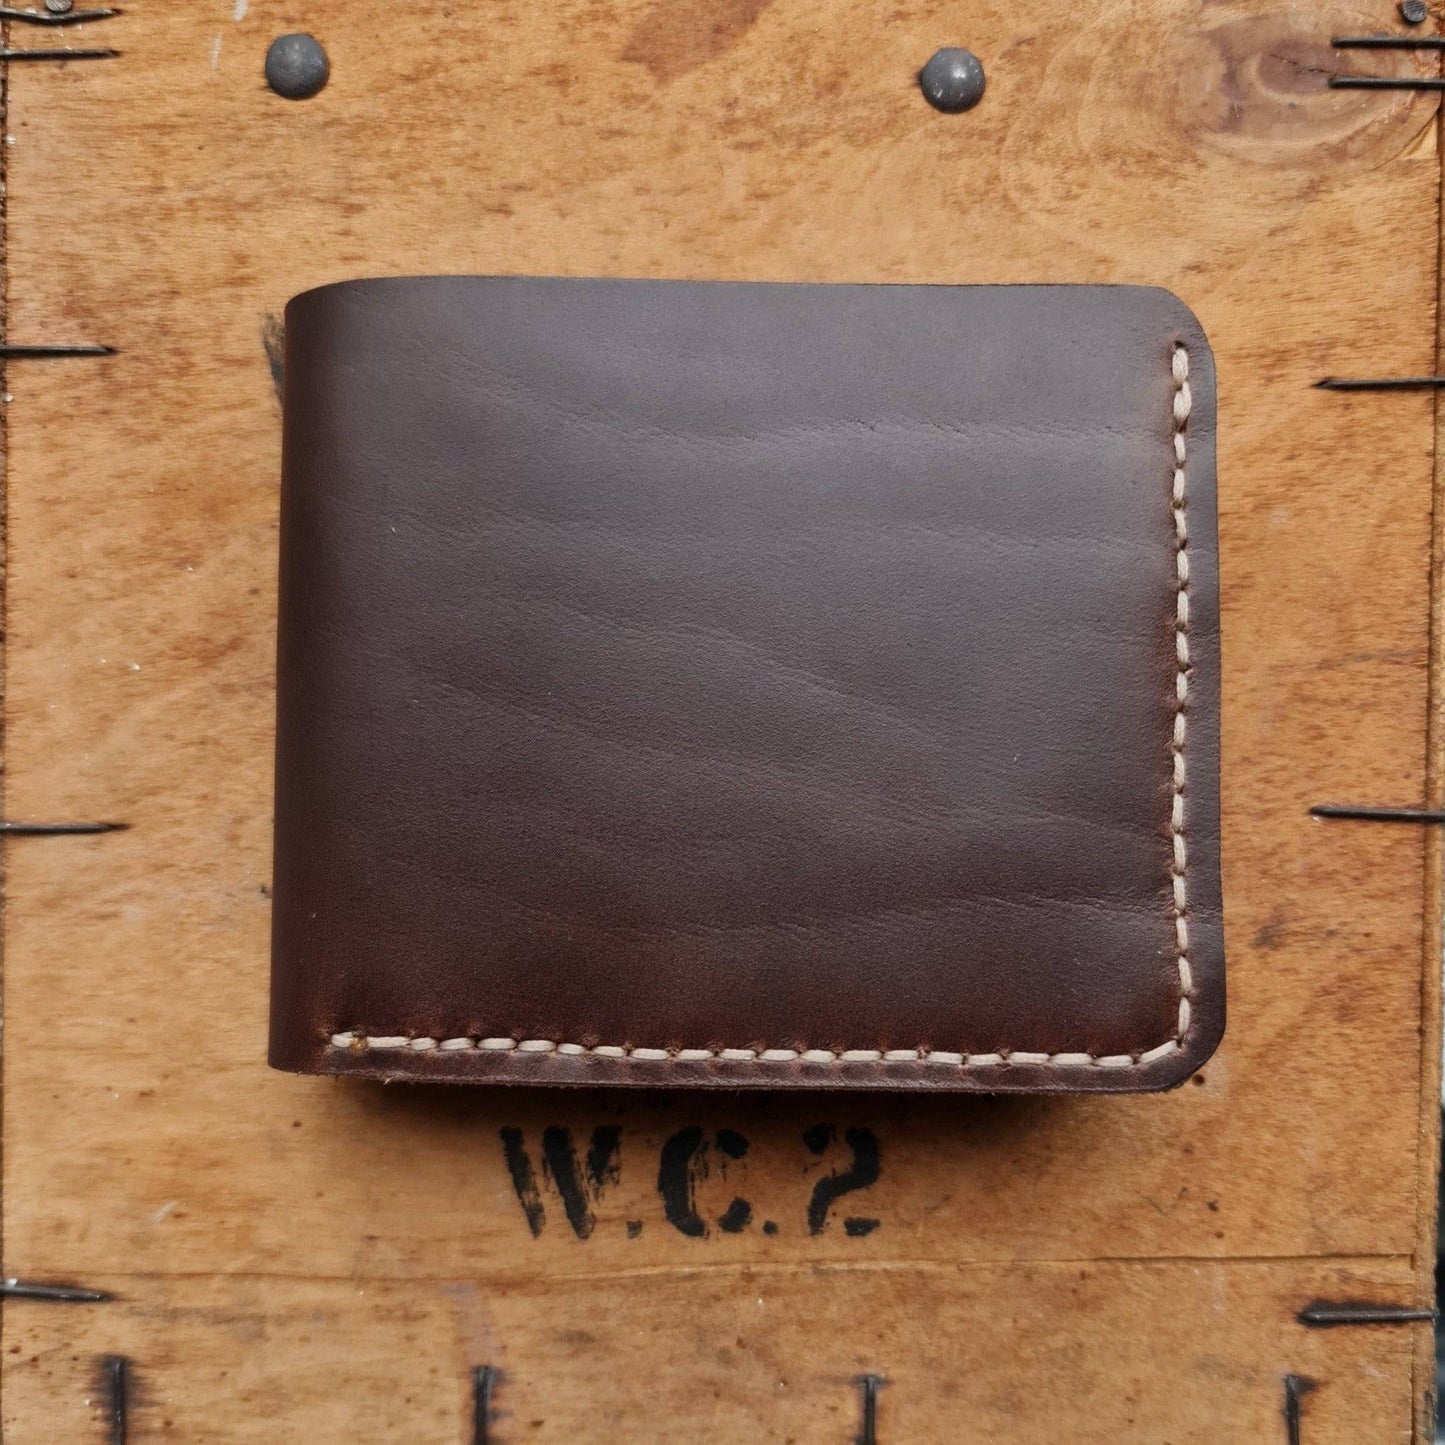 The Frontiersman men's leather wallet with cash and card holder in Brown full grain leather